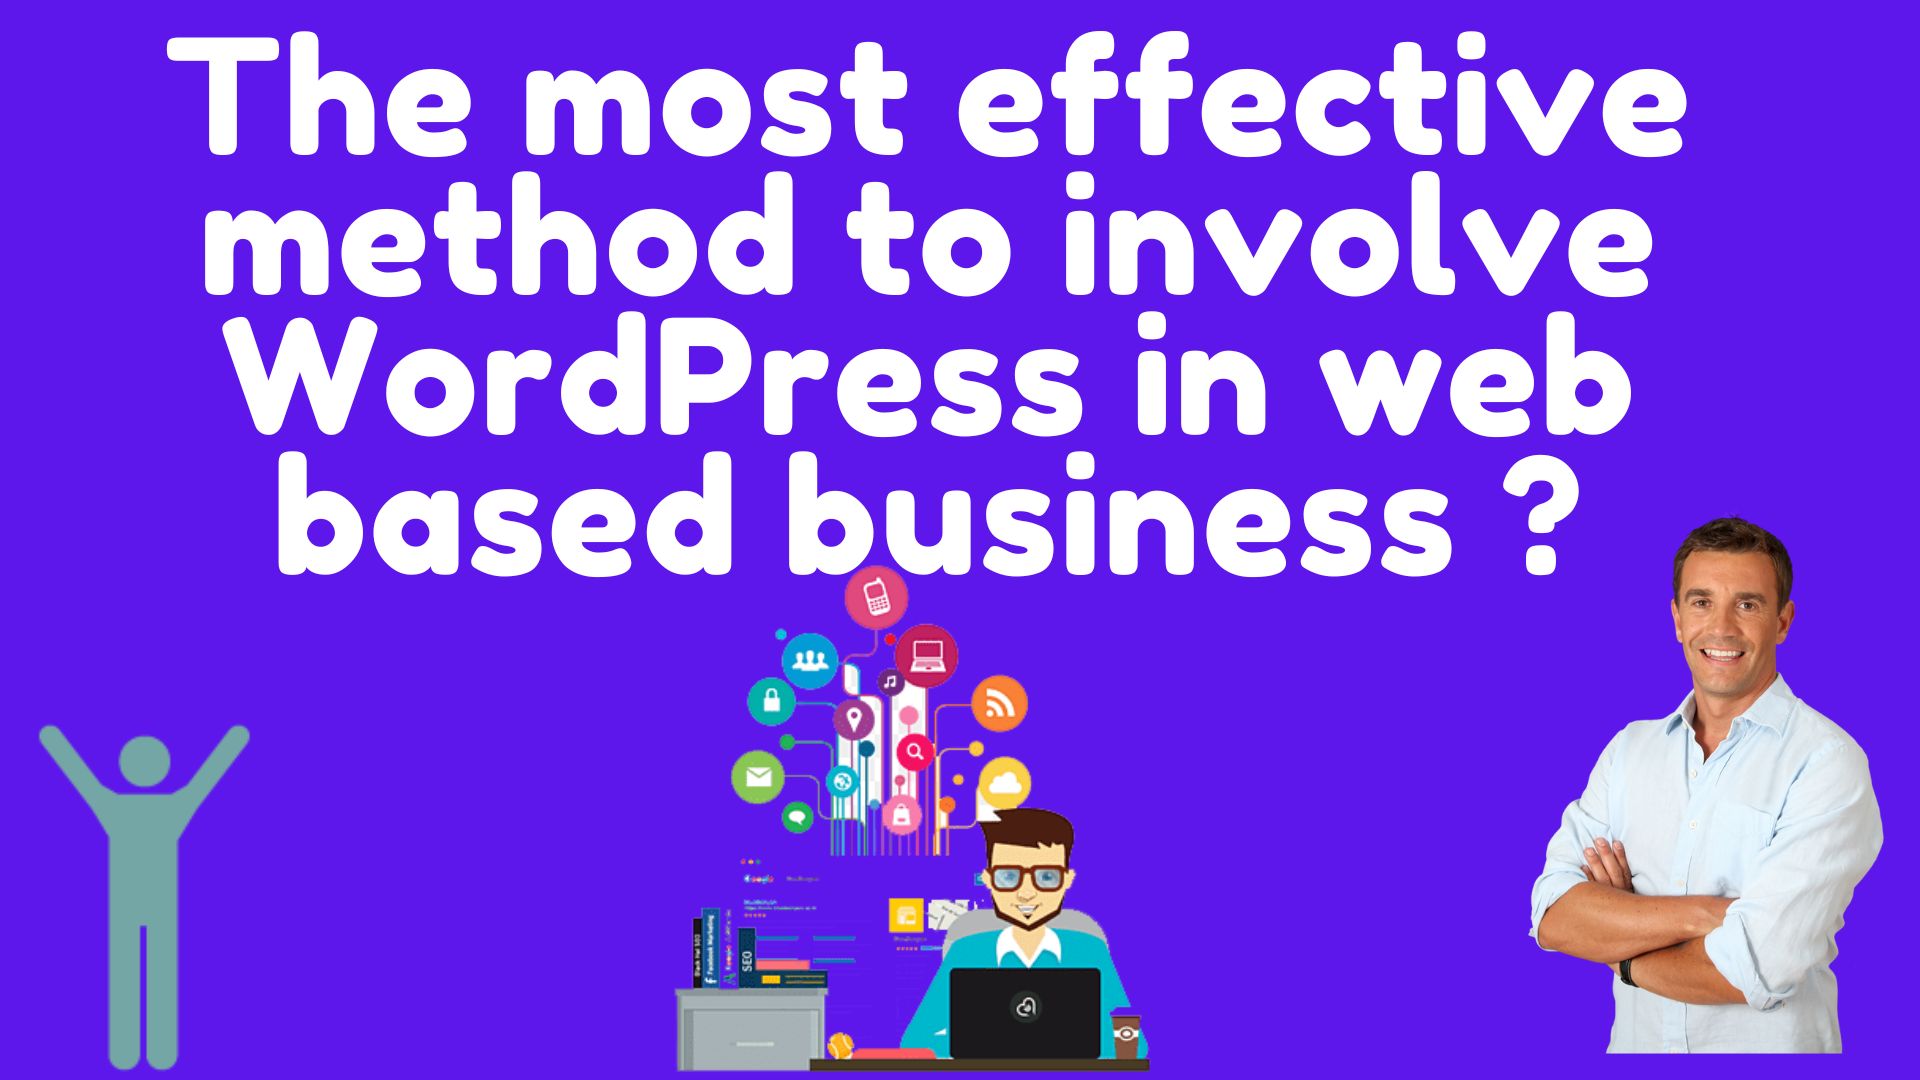 The most effective method to involve wordpress in web based business?